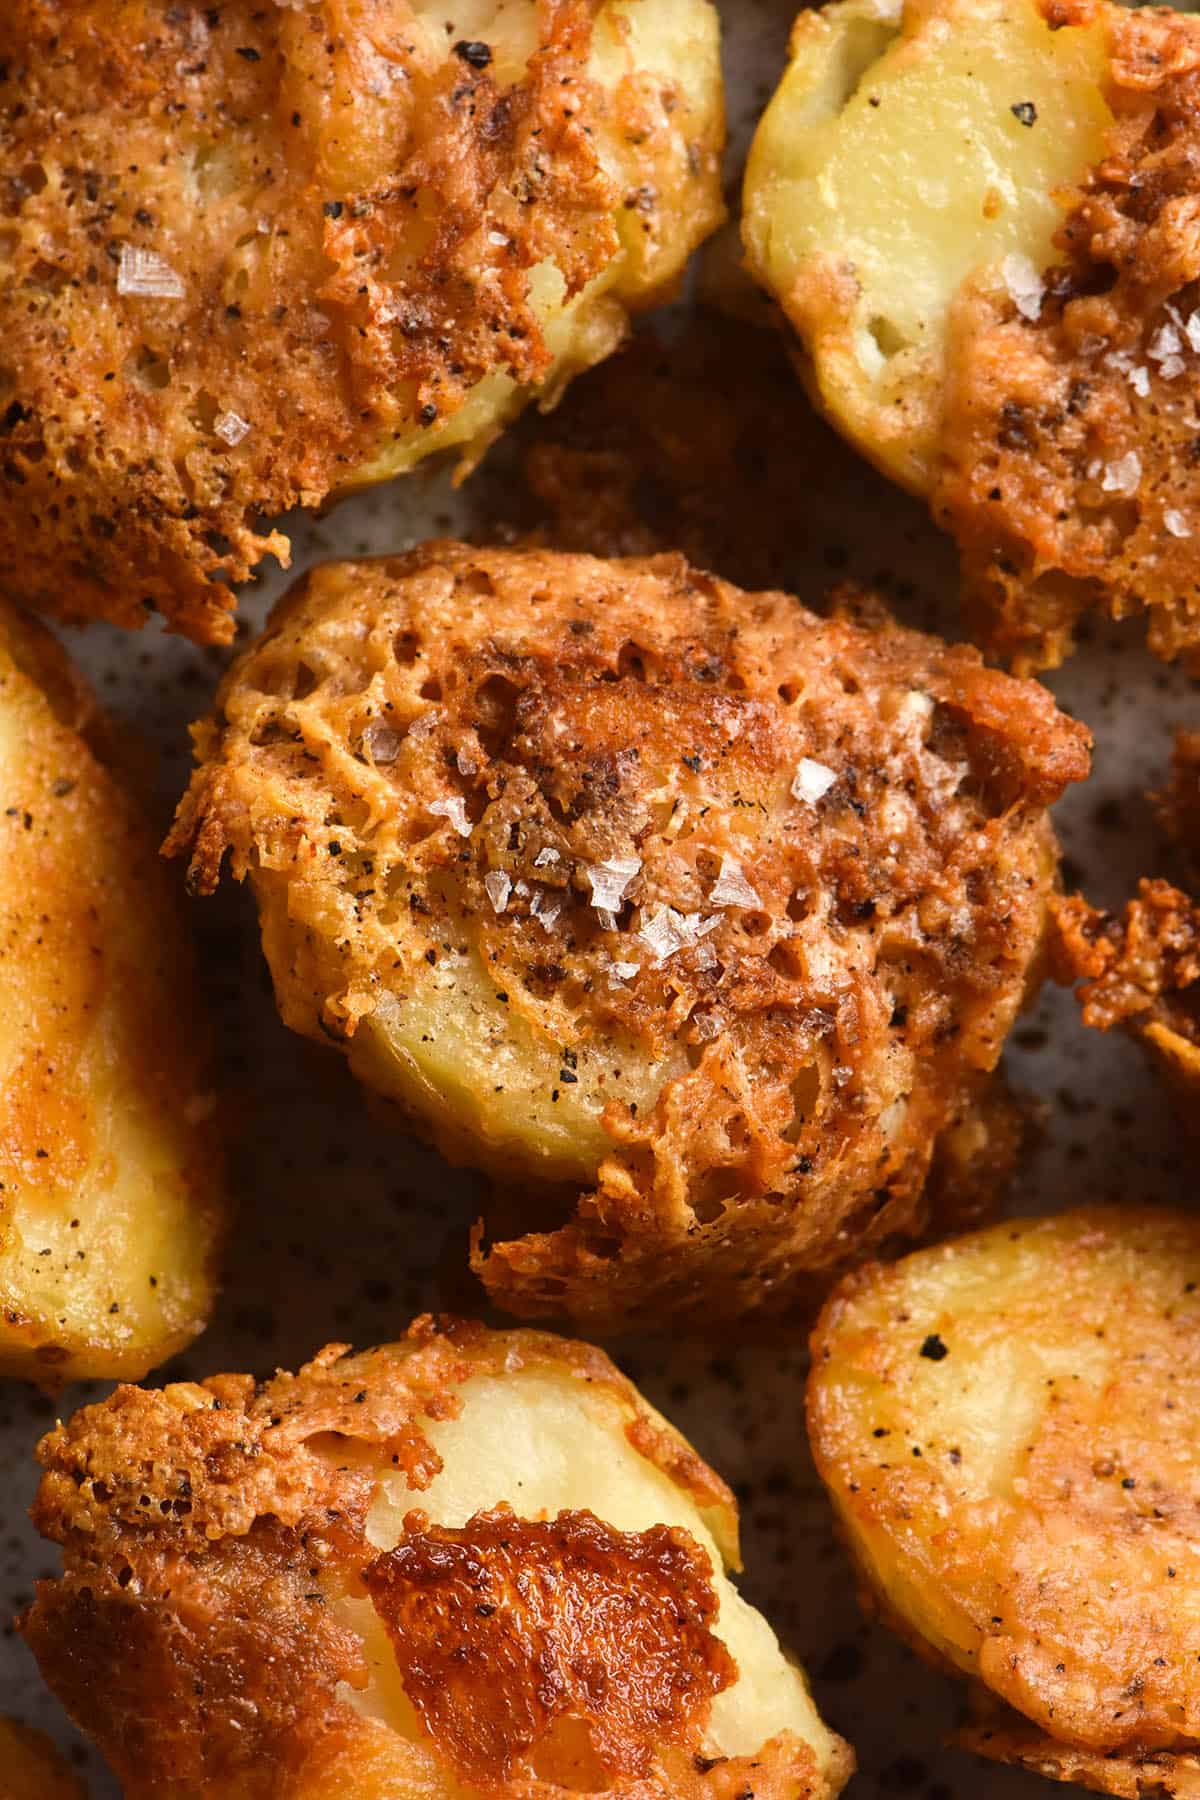 An aerial view of crispy cacio pepe roasted potatoes on a plate. They have a crispy parmesan and pepper crust and are sprinkled with sea salt flakes